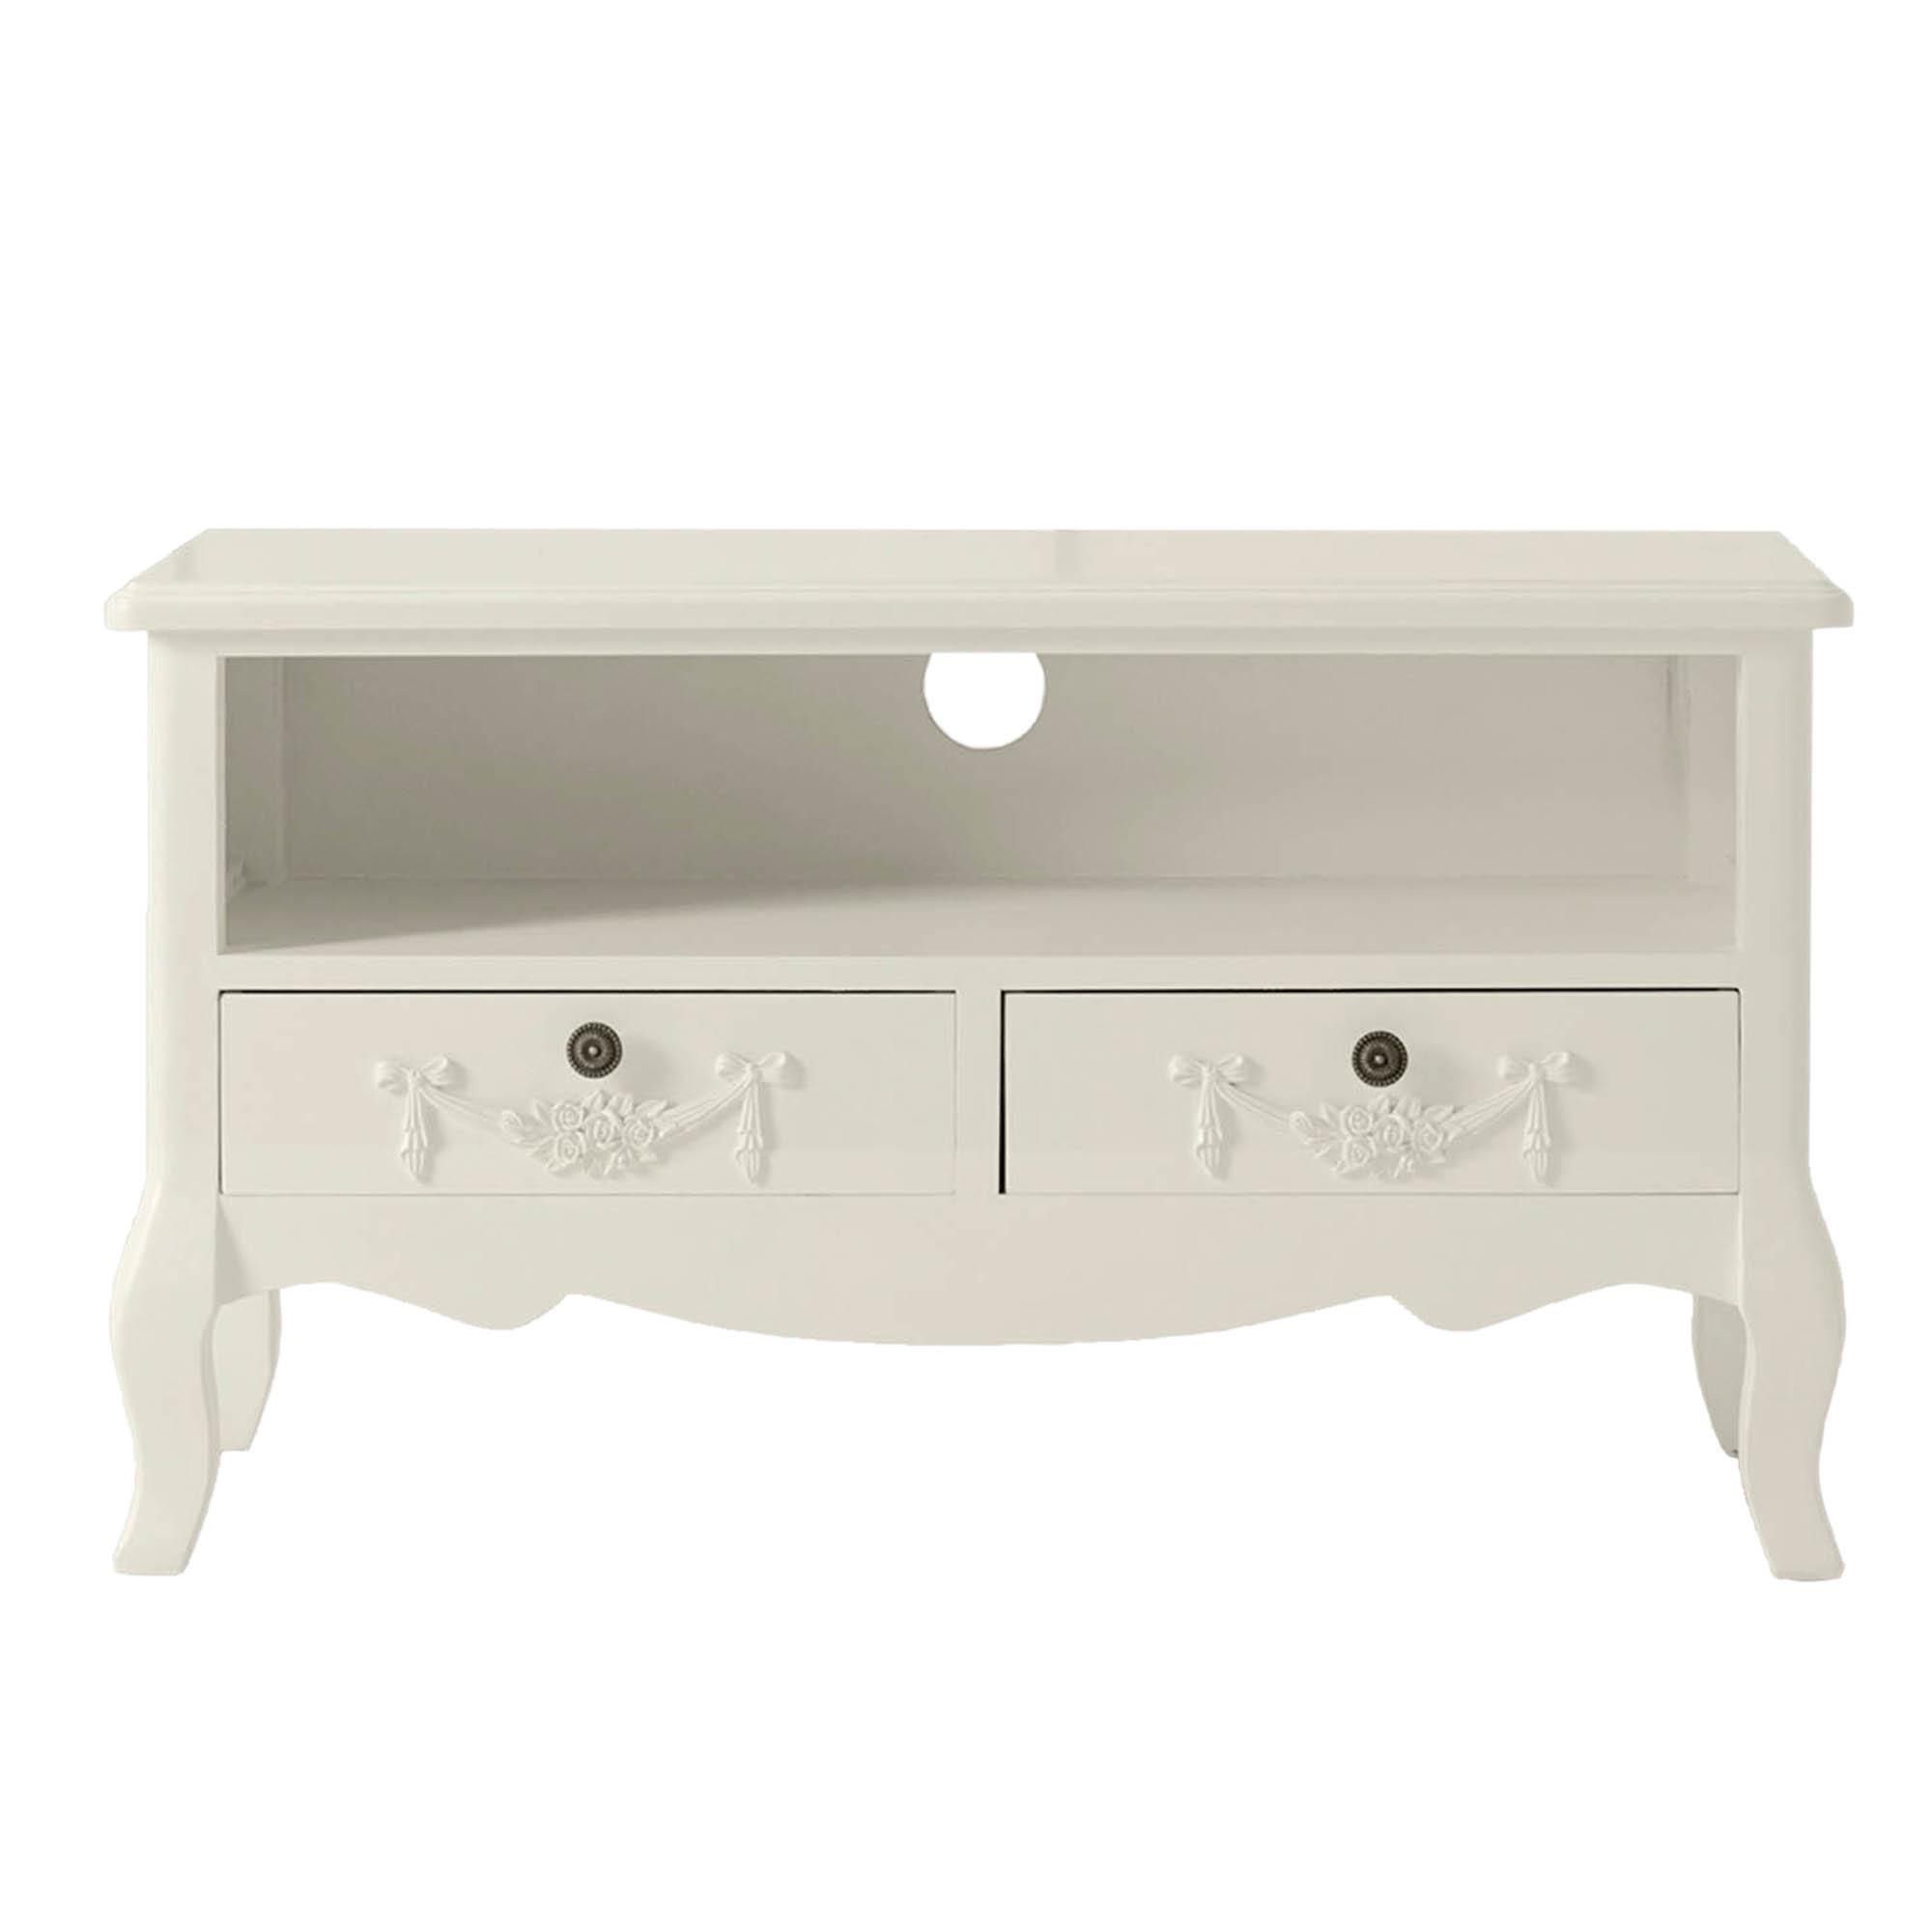 Classic Hanna Oyster Corner Tv Stands (View 3 of 7)